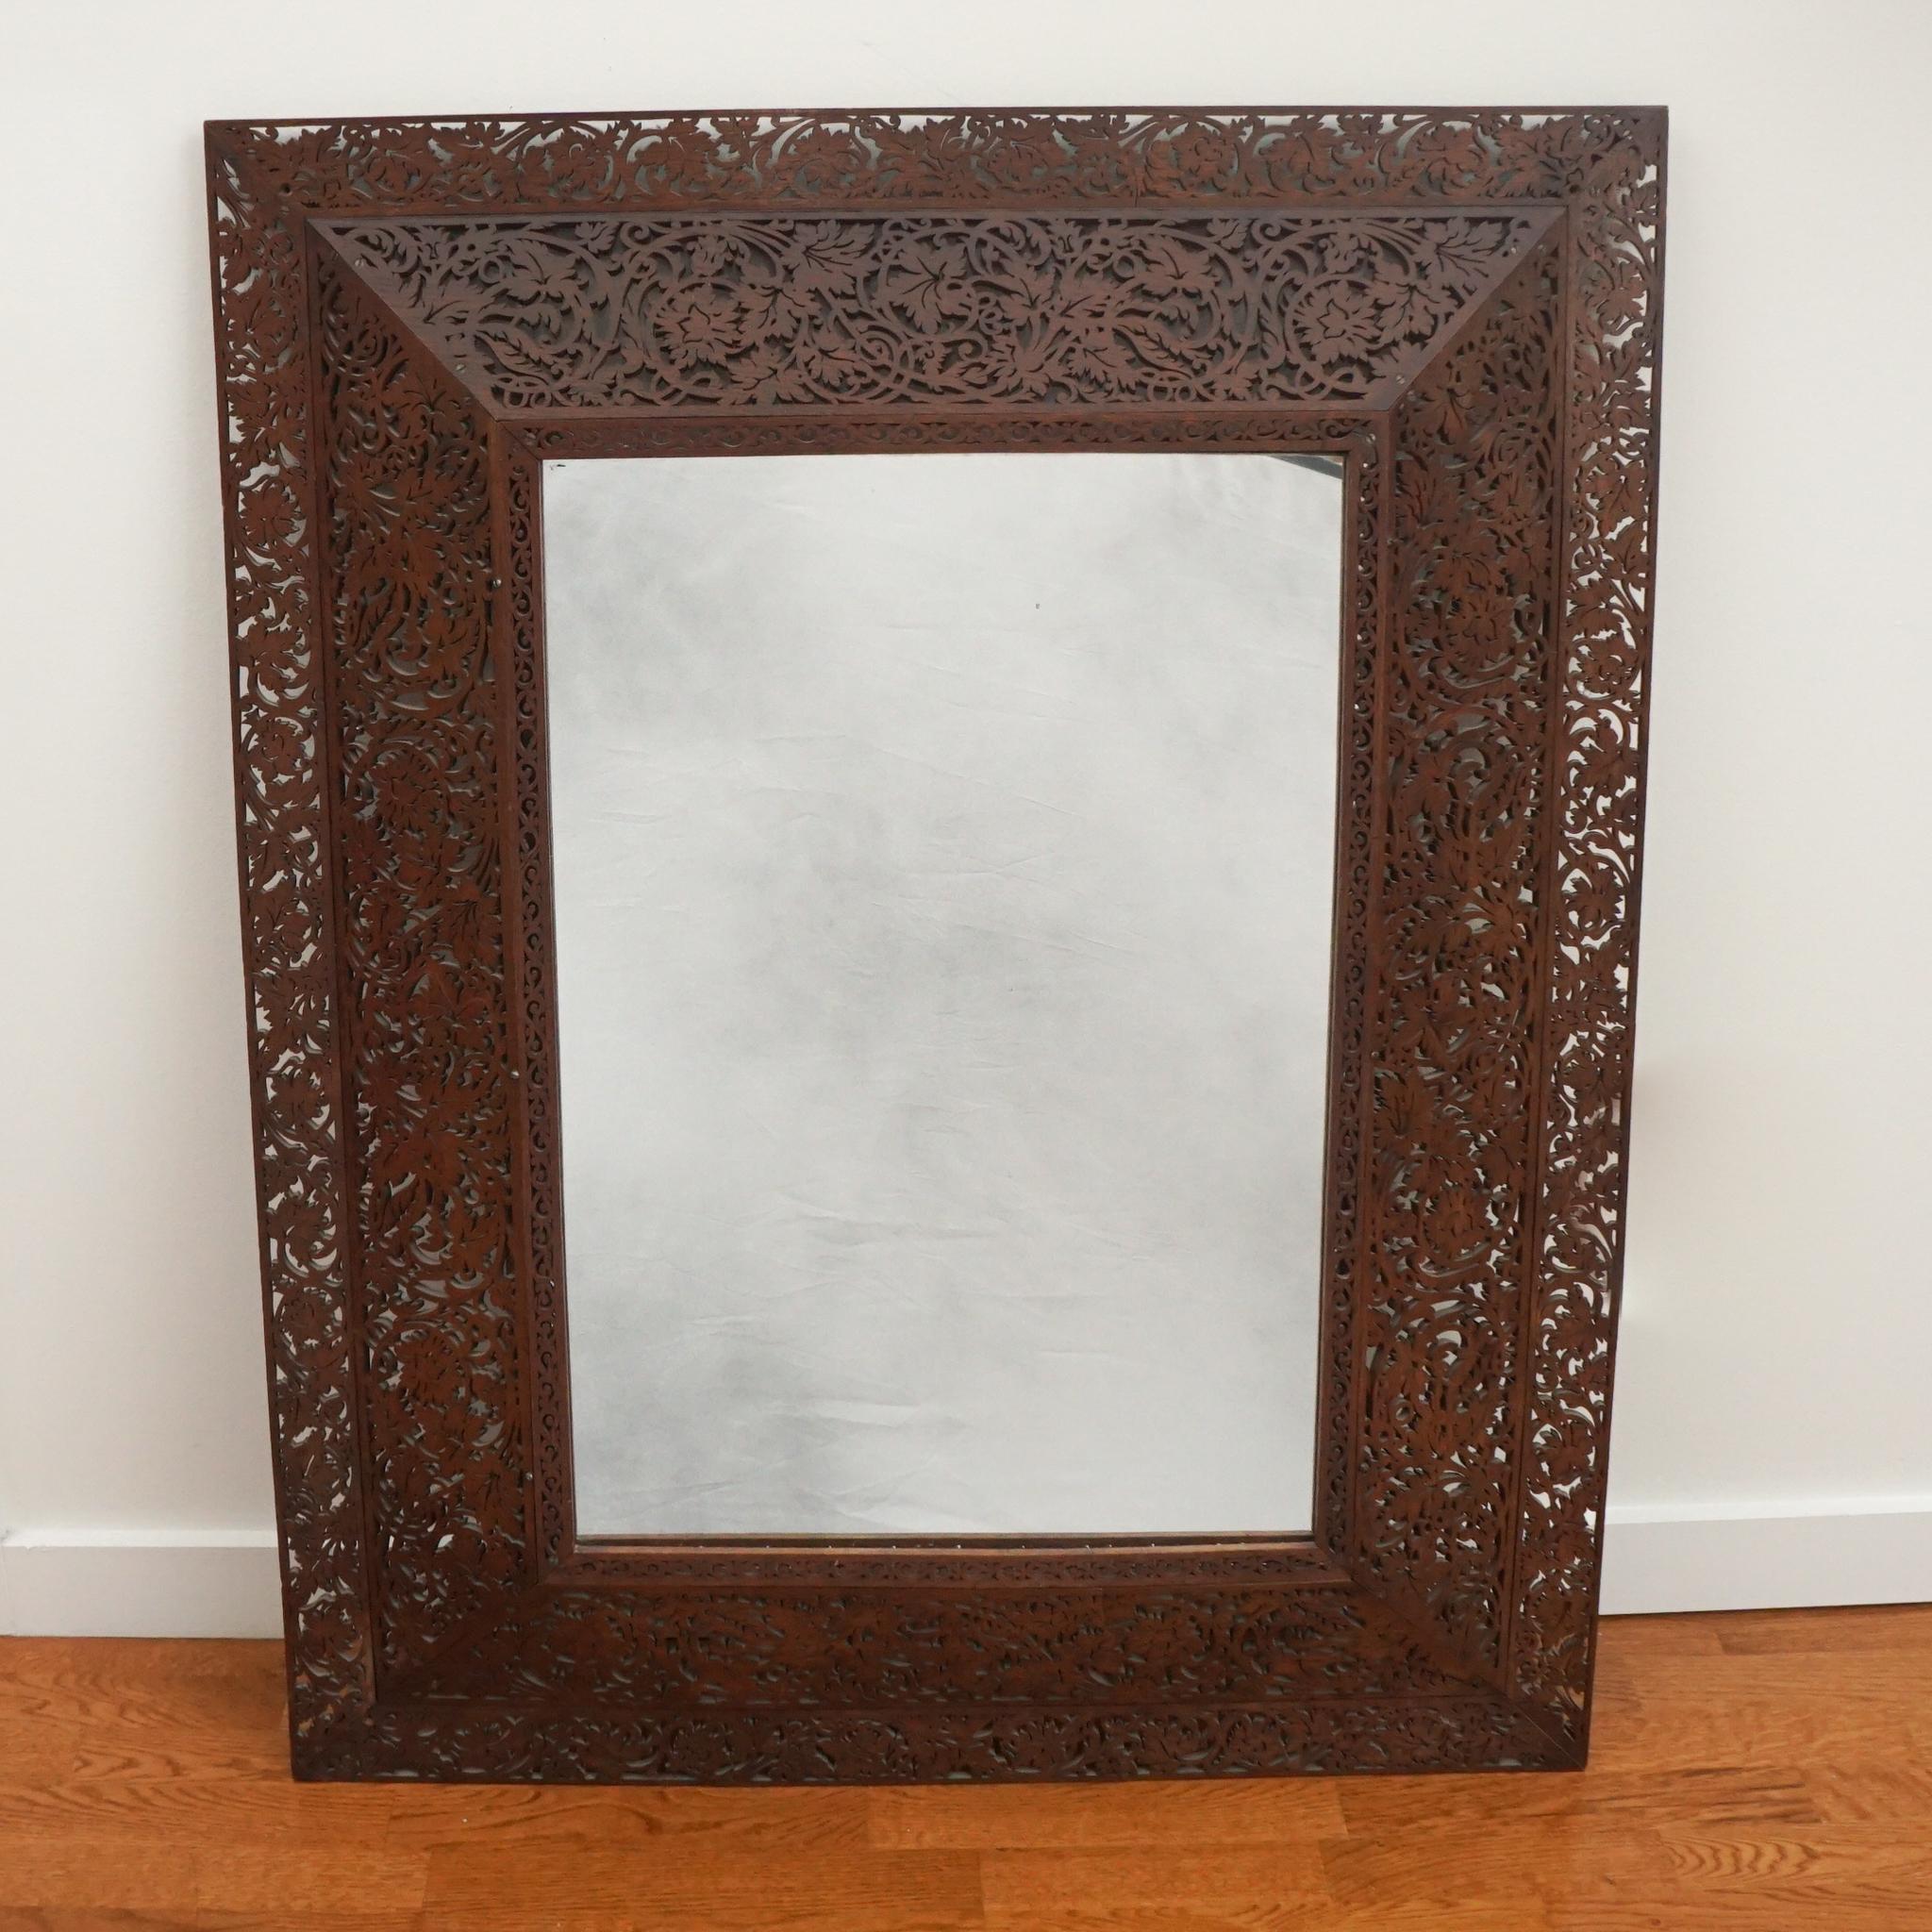 The exquisite carved wood frame mirror, shown here, is from France, c. 1890. Featuring an intricate carved wood frame, the mirror foliage scrollwork is exquisite.  Frame is built in four different sections, installed around the mirror. To hang this